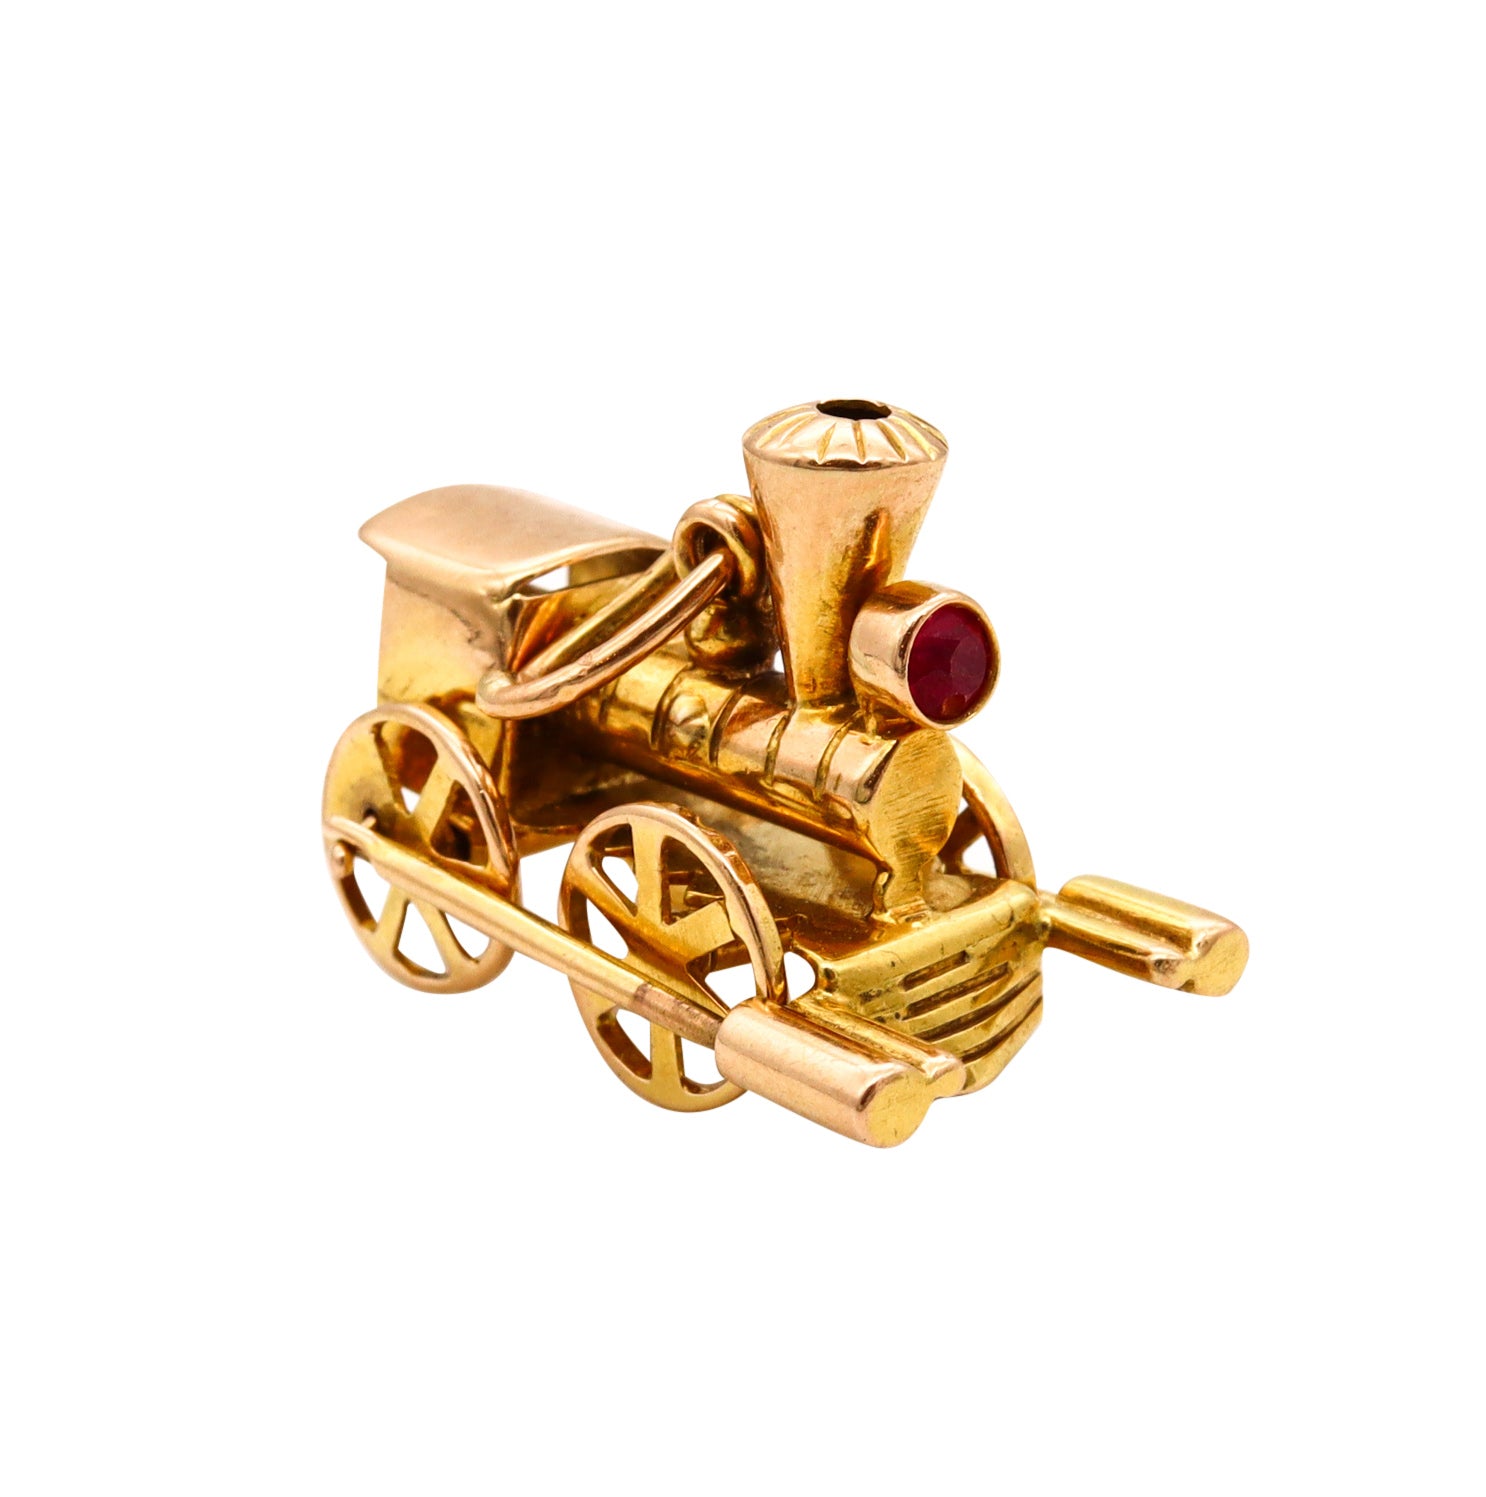 -Vintage Locomotive Train Charm Pendant With Movable Mechanical Parts In Solid 18Kt Yellow Gold With Ruby